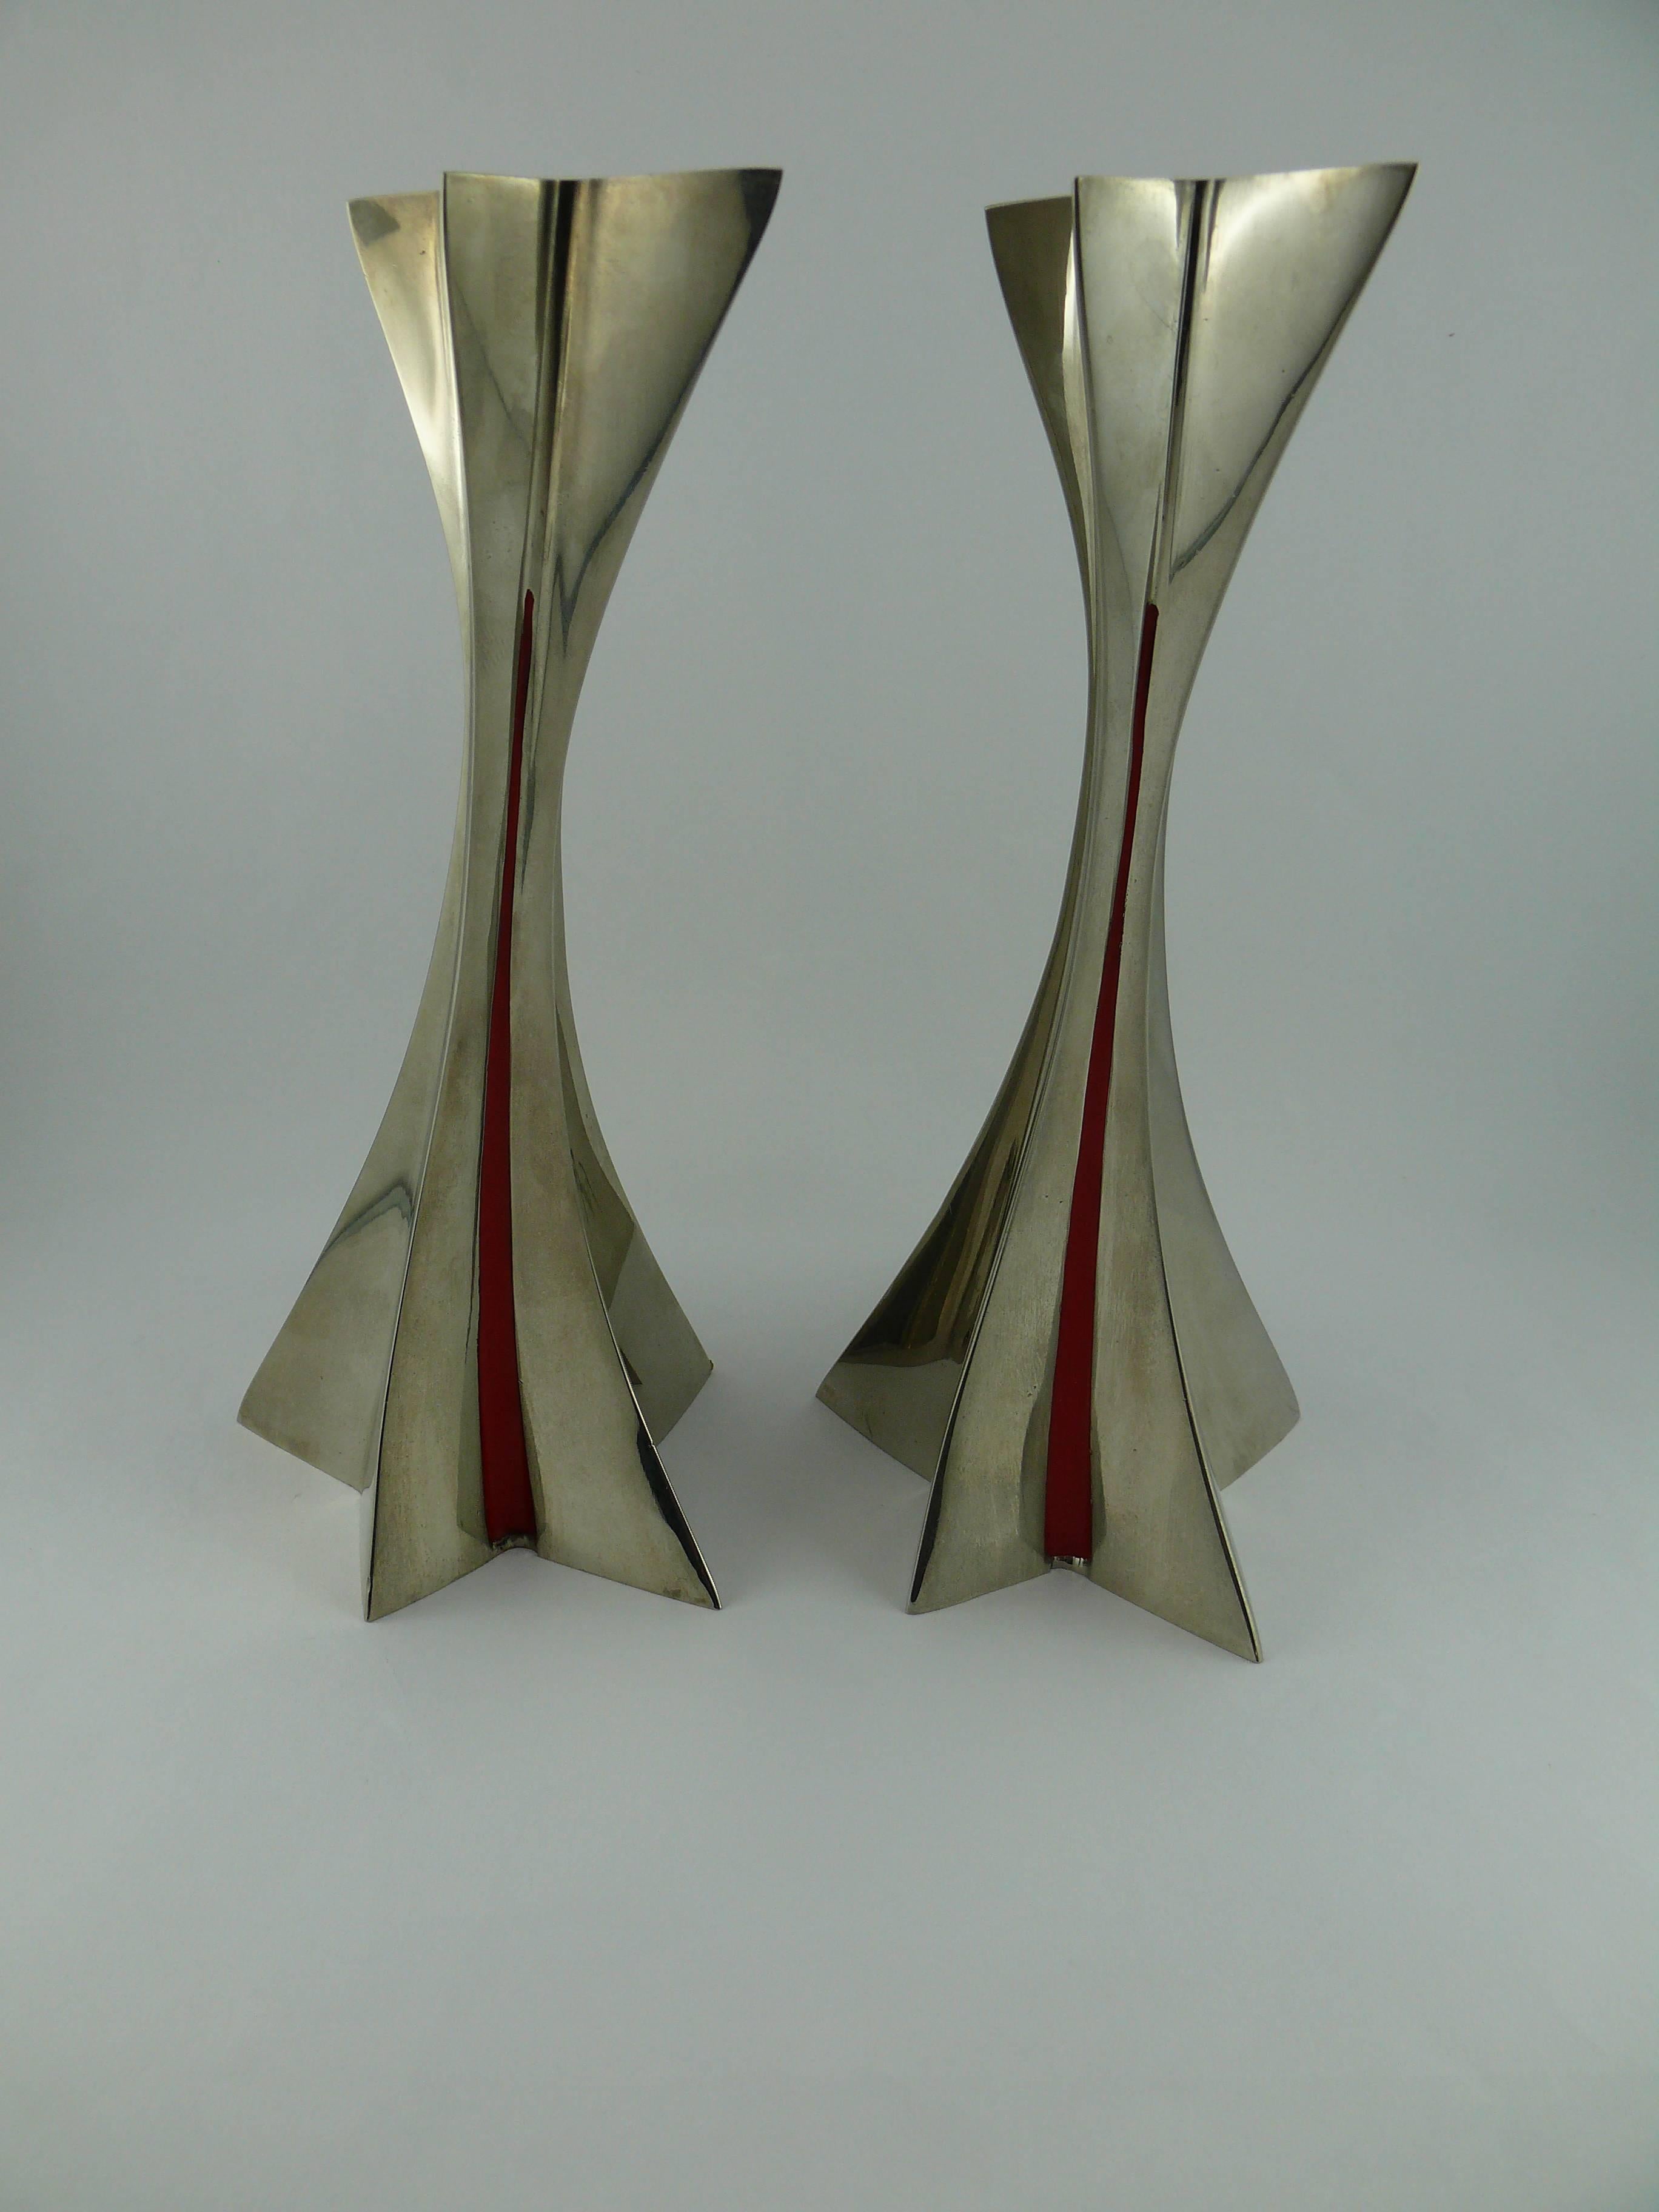 THIERRY MUGLER massive pair of candelsticks in stainless steel and red enamel, featuring shooting stars.

Iconic THIERY MUGLER's sharp futuristic design.

Embossed THIERRY MUGLER.

Indicative weight (for the pair) : 3.7 kg.

NOTES
- This is a